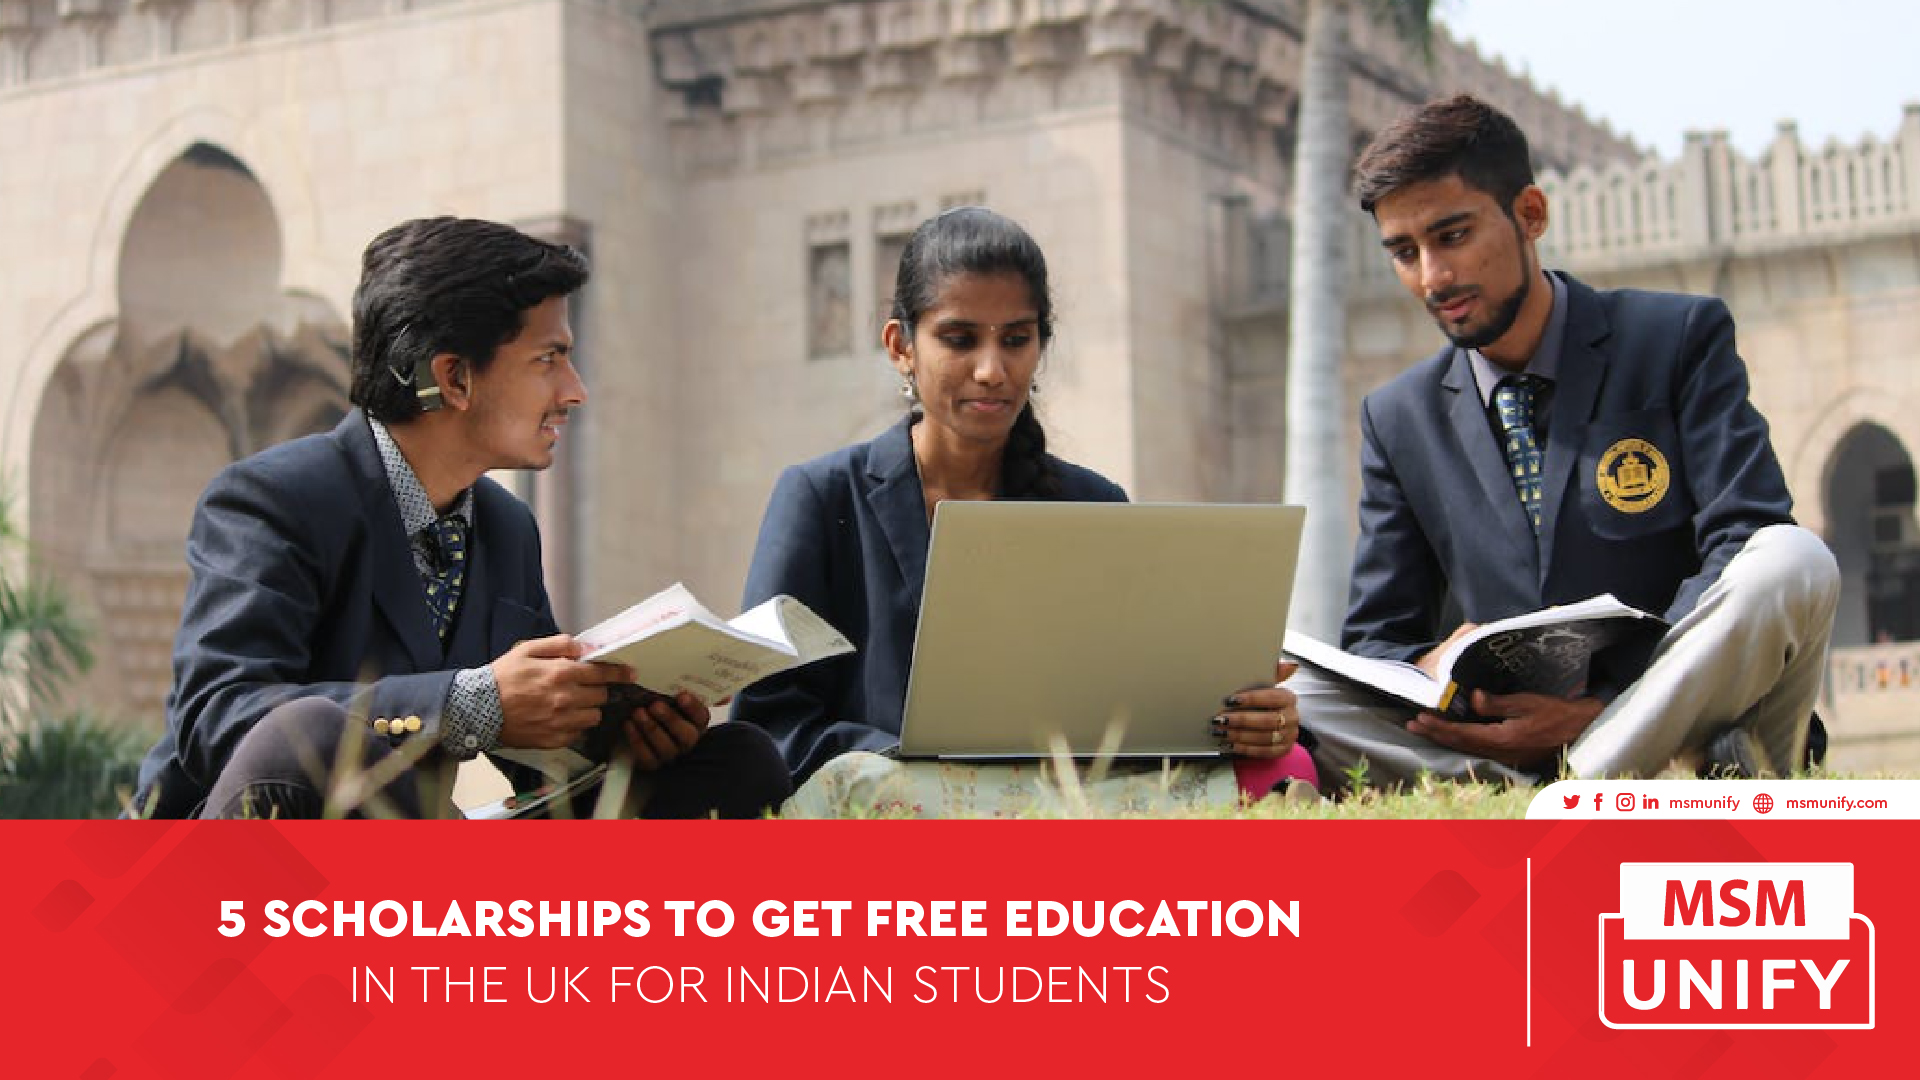 5 Scholarships to Get Free Education in the UK